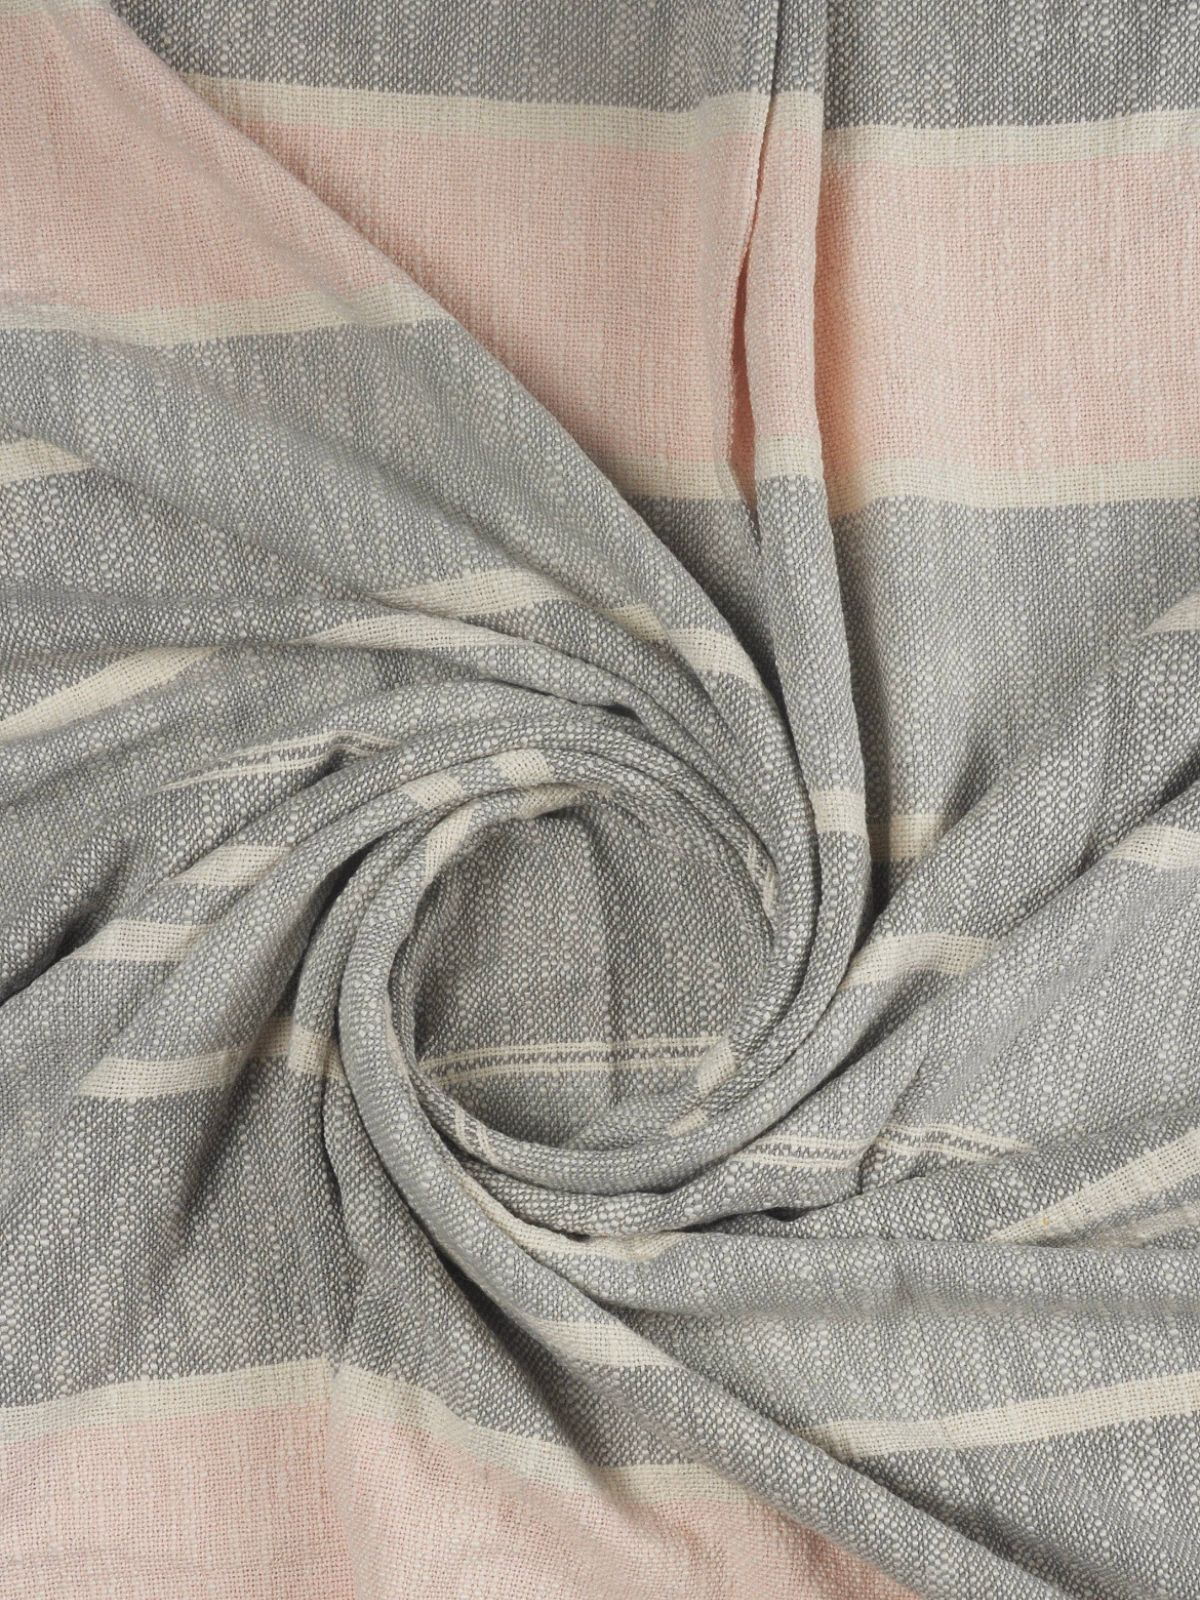 Touch of Blush Striped 100% Cotton Throw Blanket with Fringe.